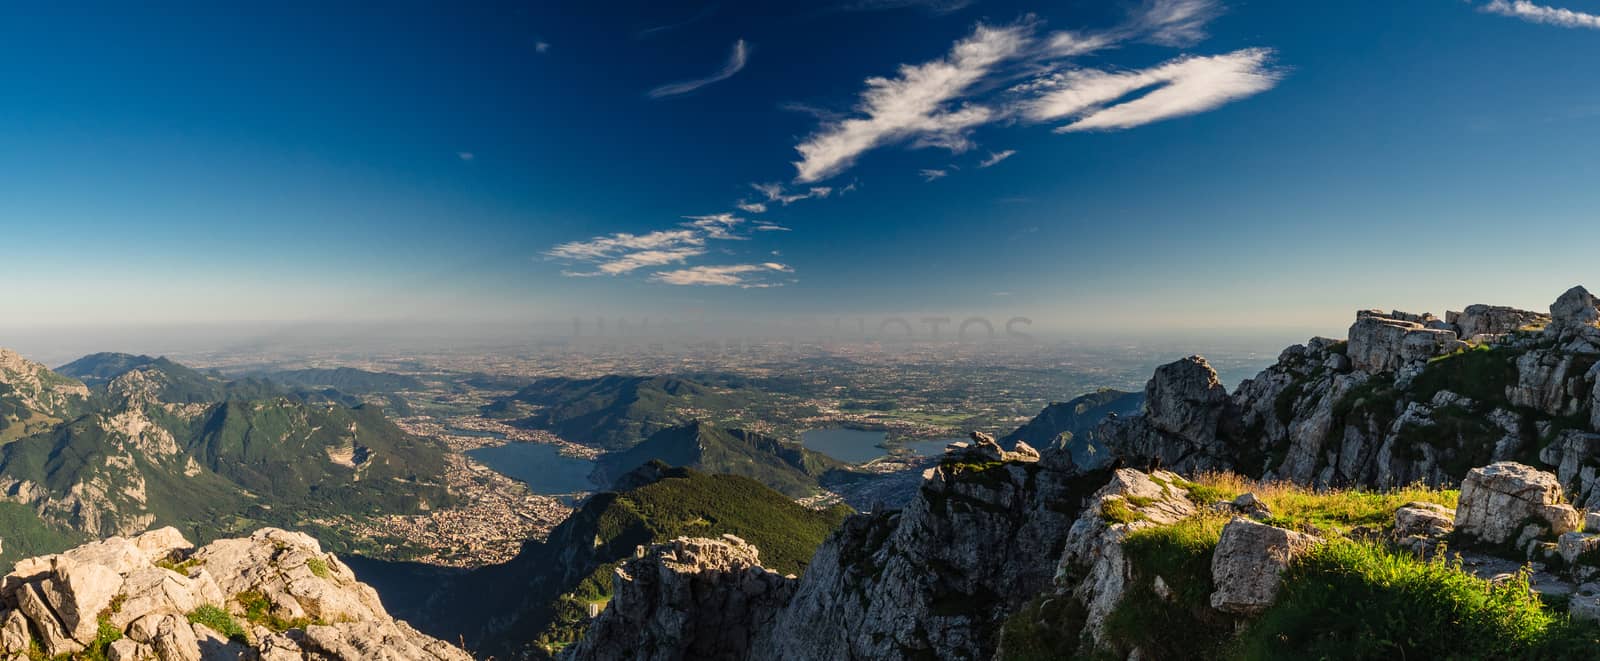 Lecco and Padan Plain as seen from Grigna Meridionale in Lombardy, Italy